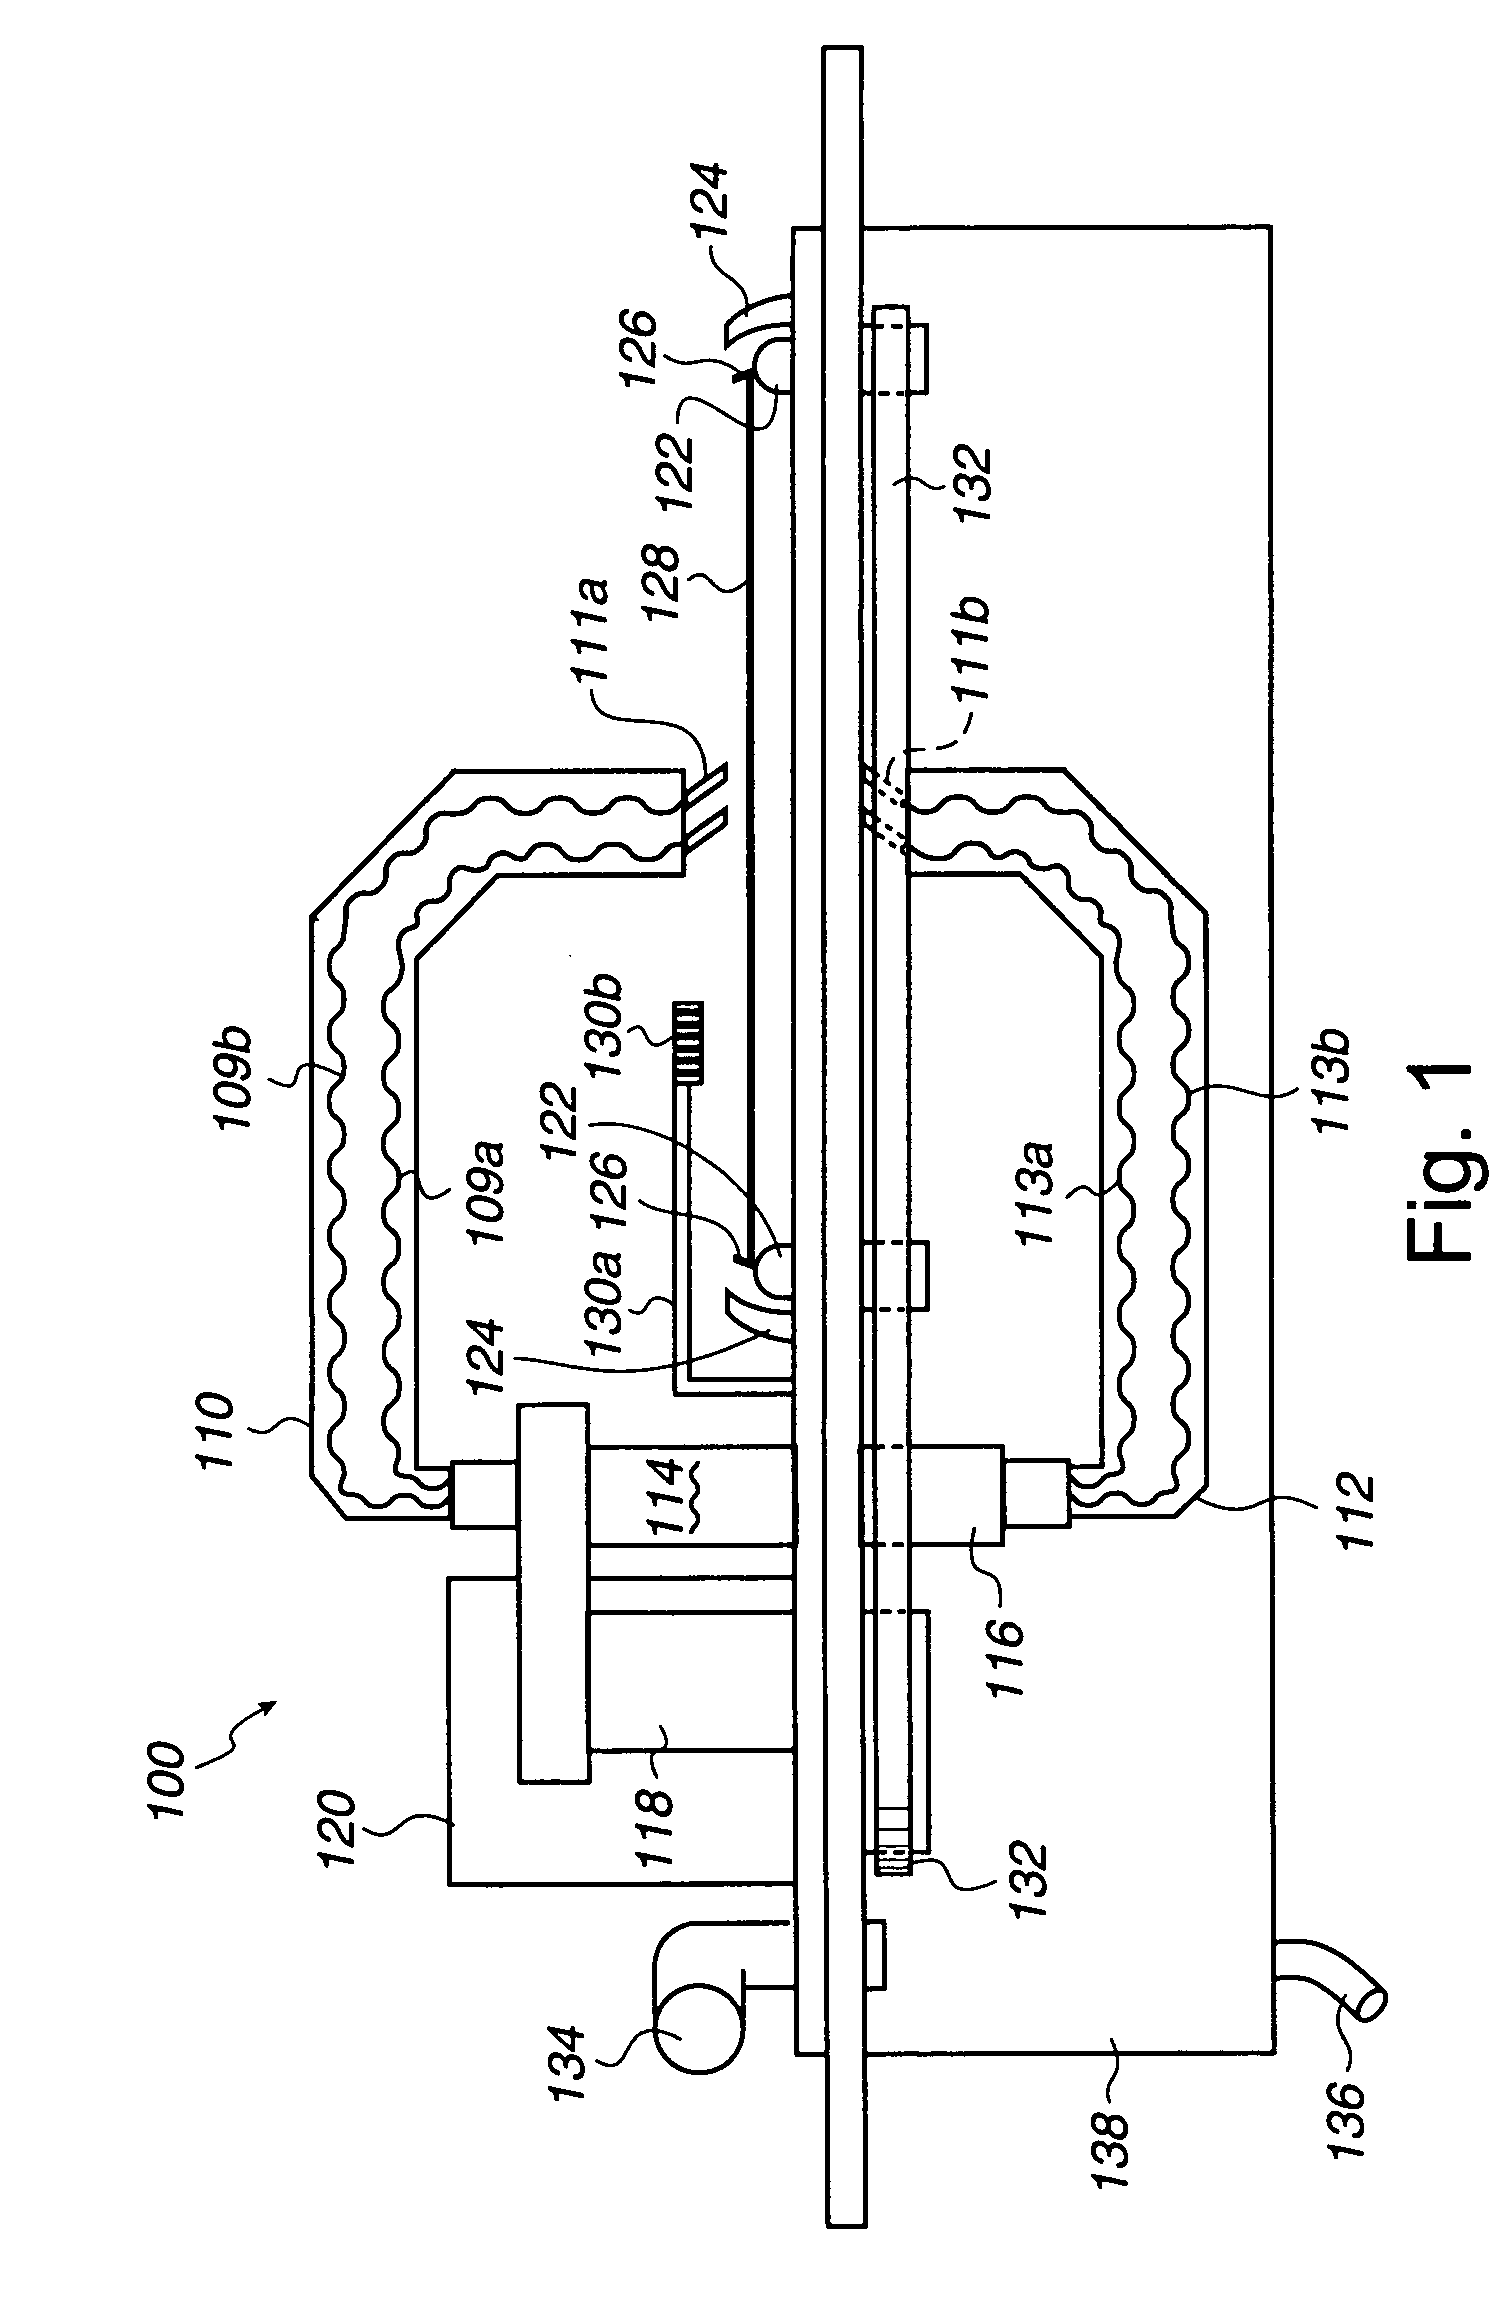 Apparatus and method for substrate preparation implementing a surface tension reducing process